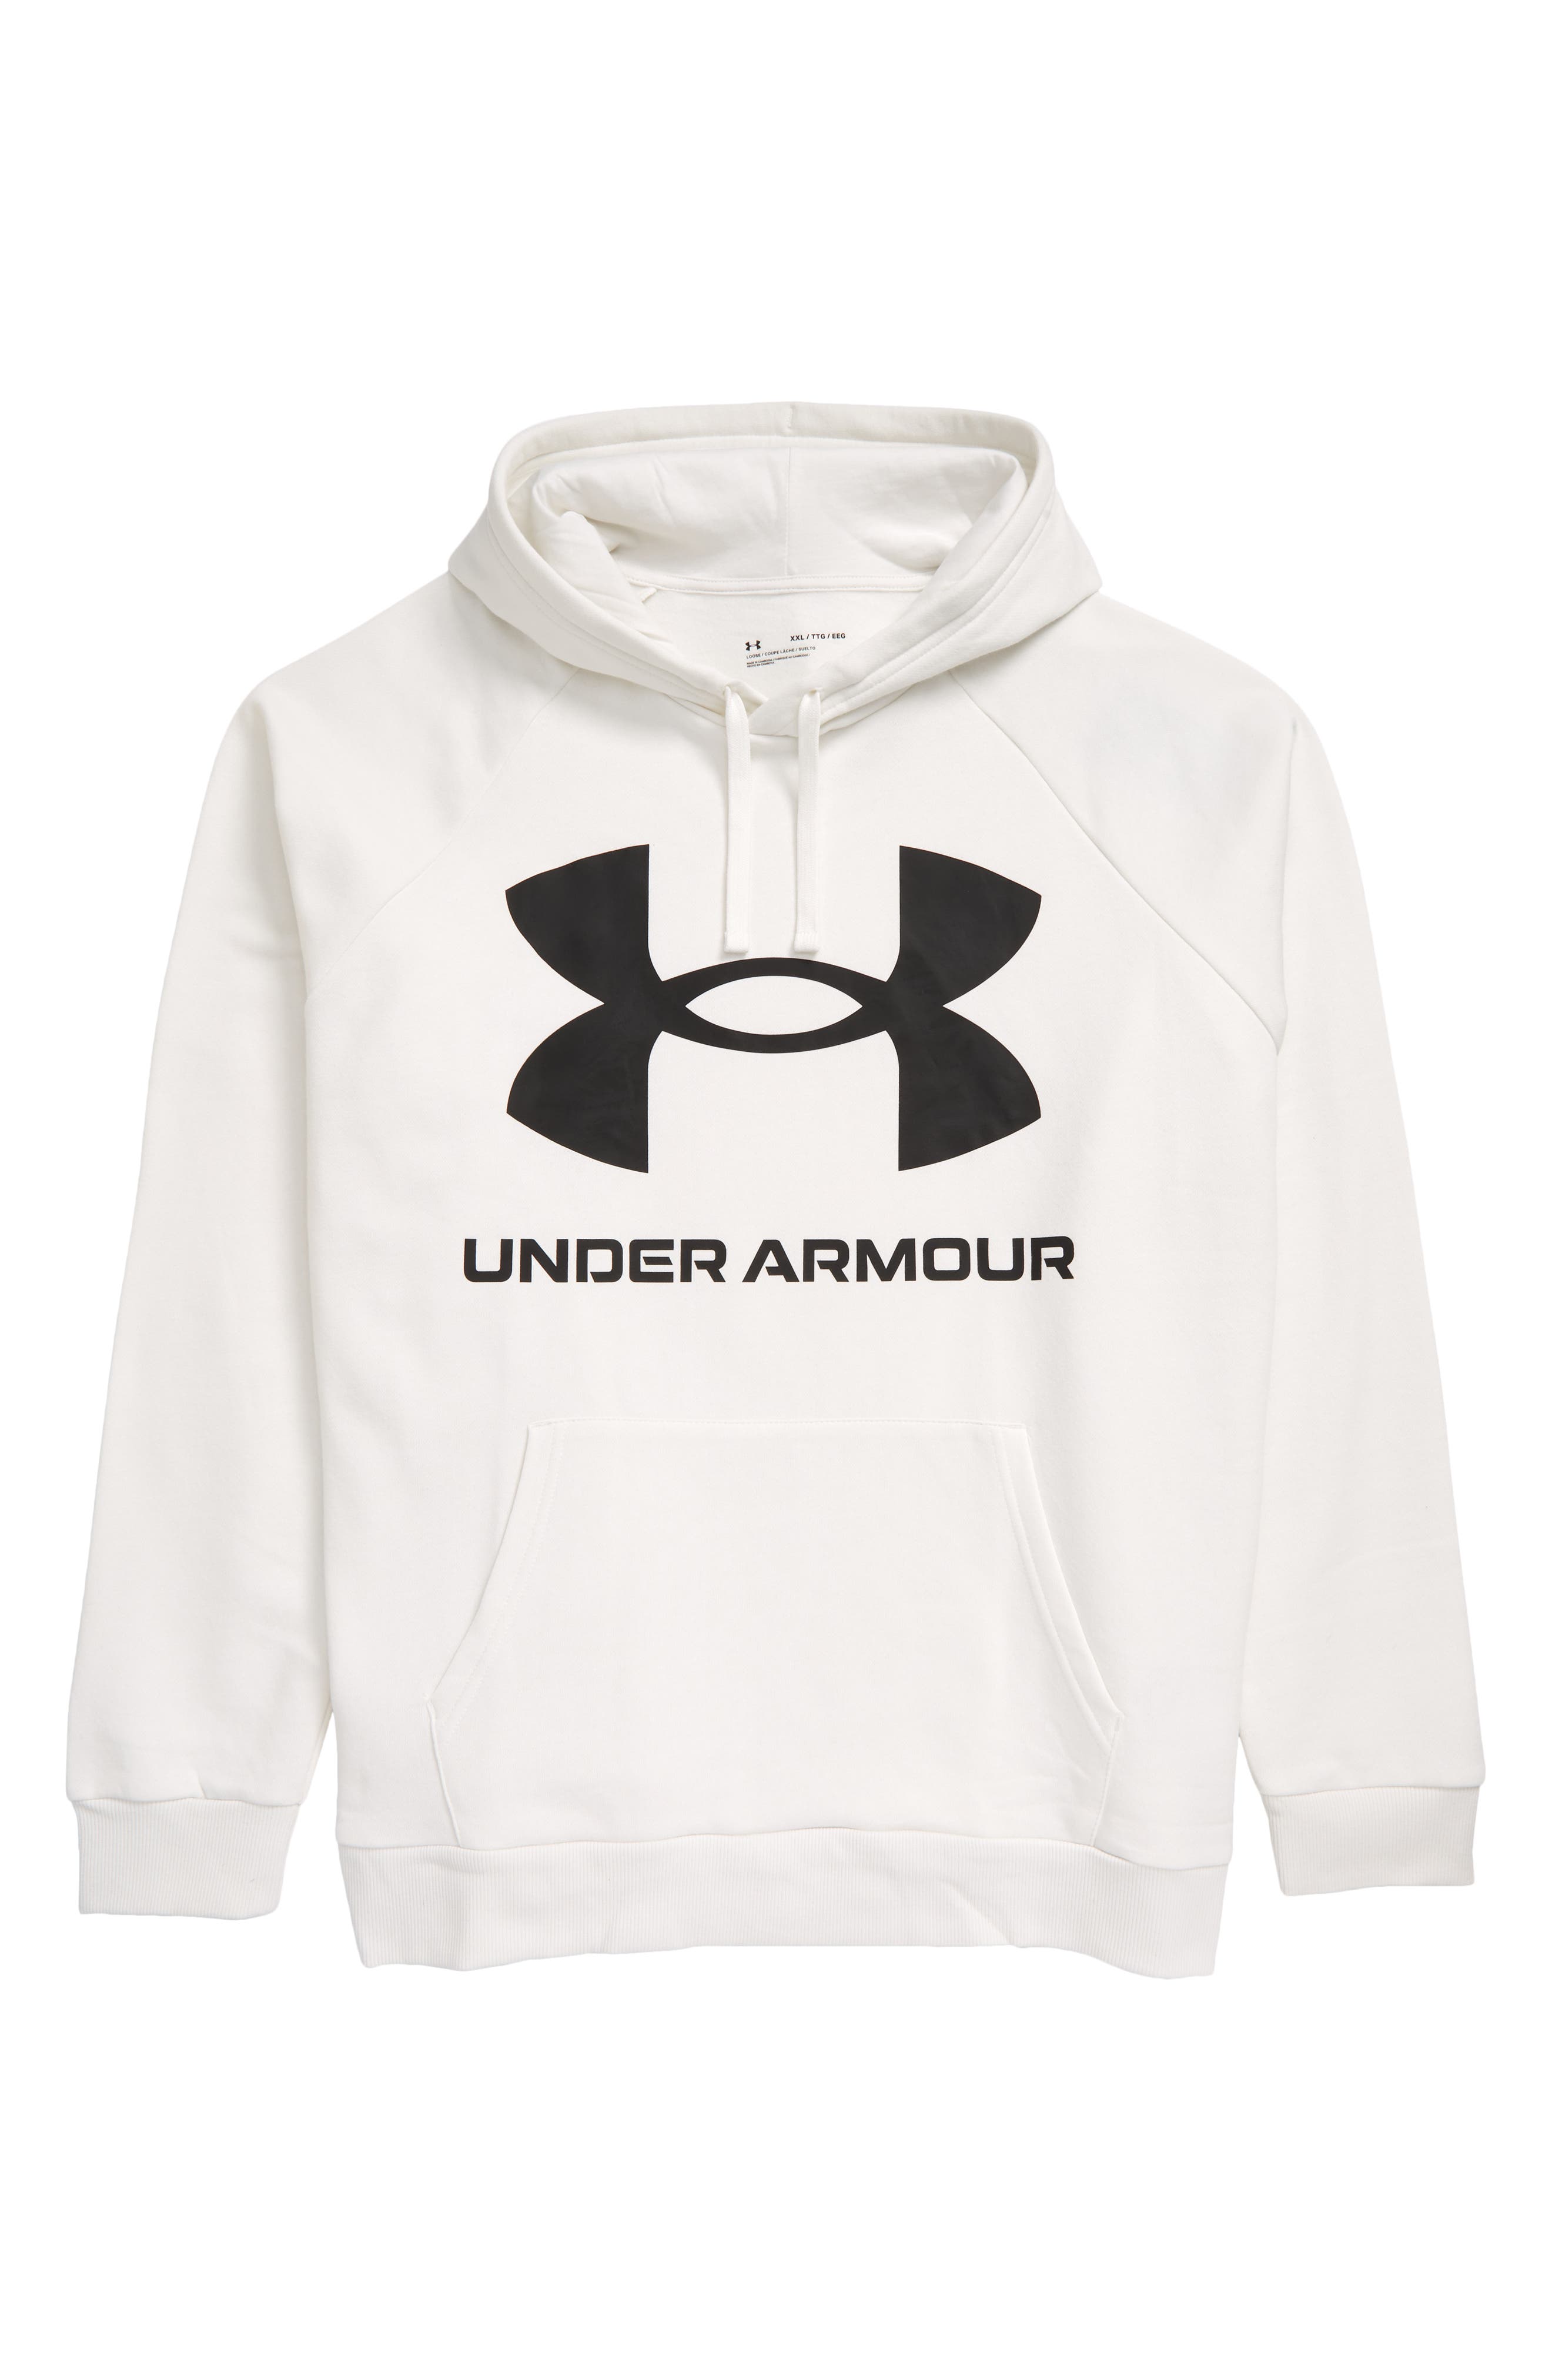 Sports & Outdoors Under Armour Boys' Rival Fleece Printed Hoodie 